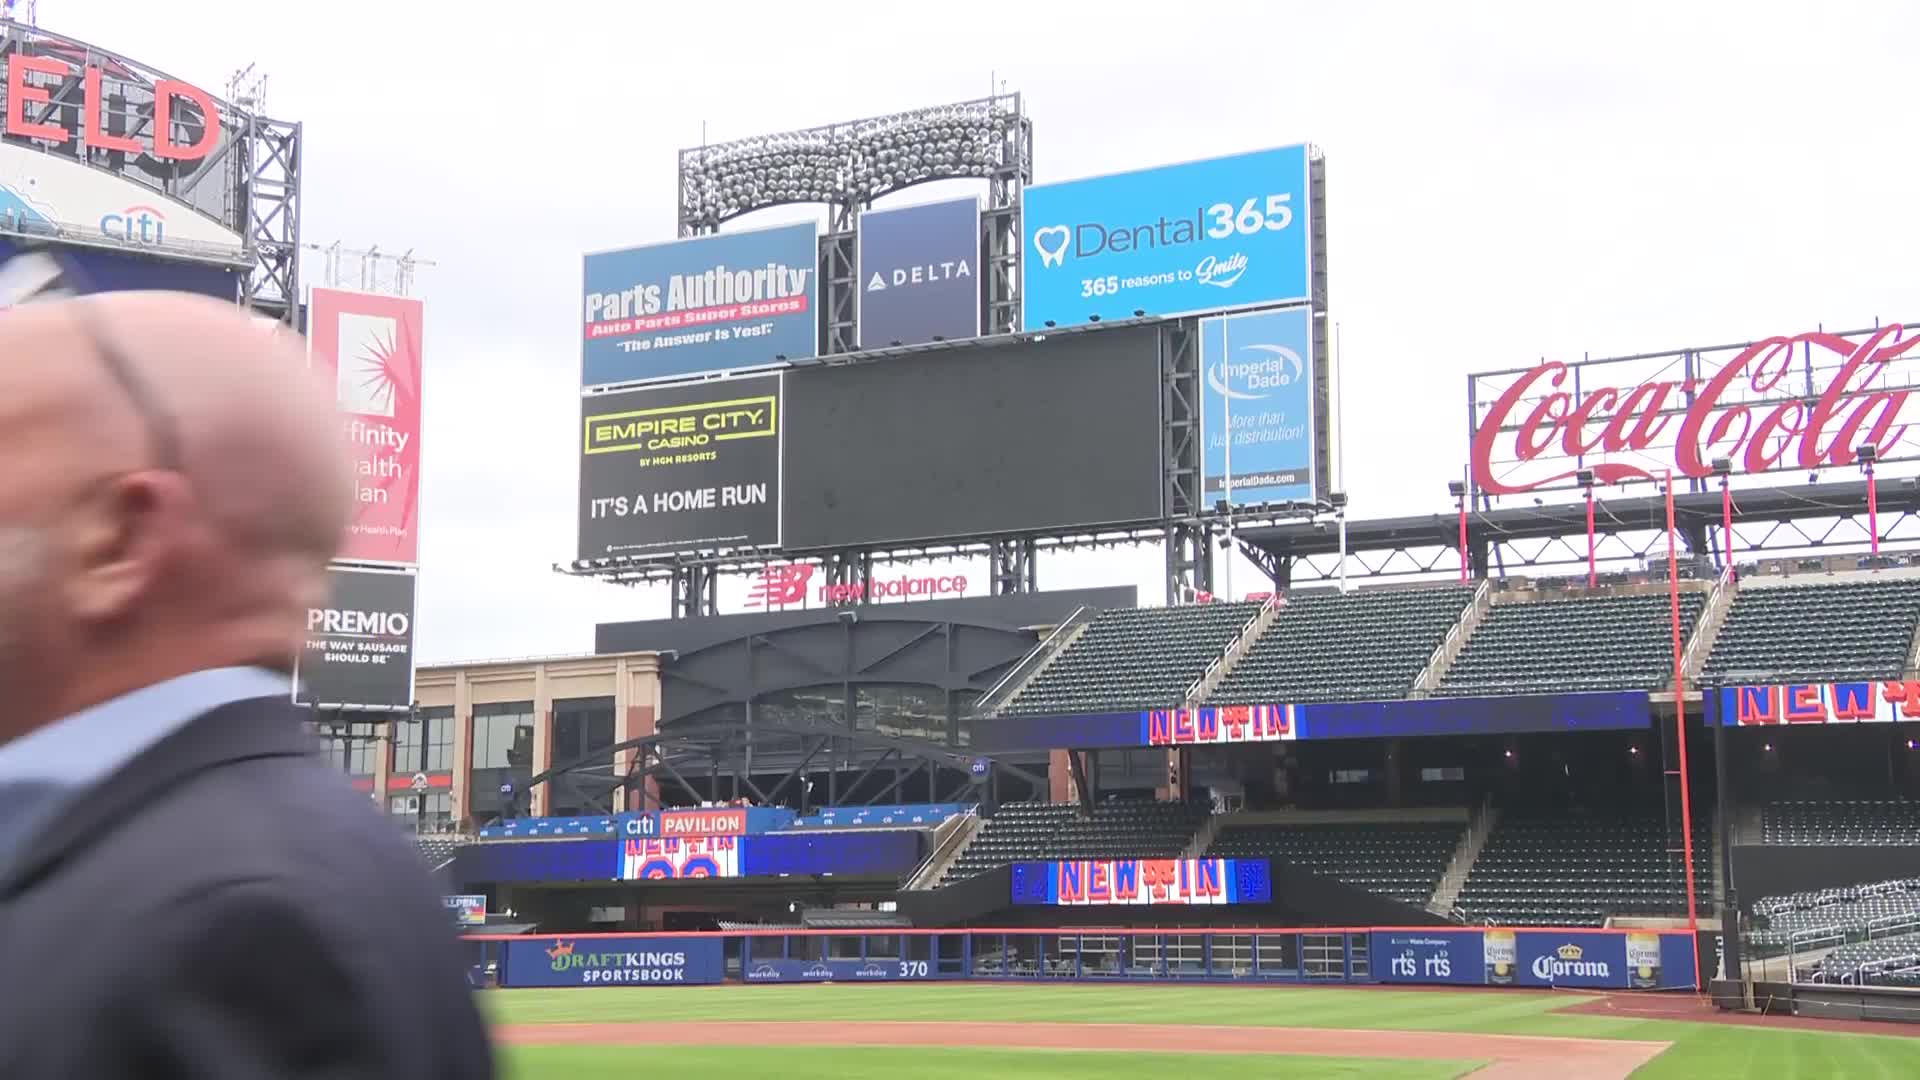 SNY on Twitter "The Mets are giving a sneak peek at the new 4K LED